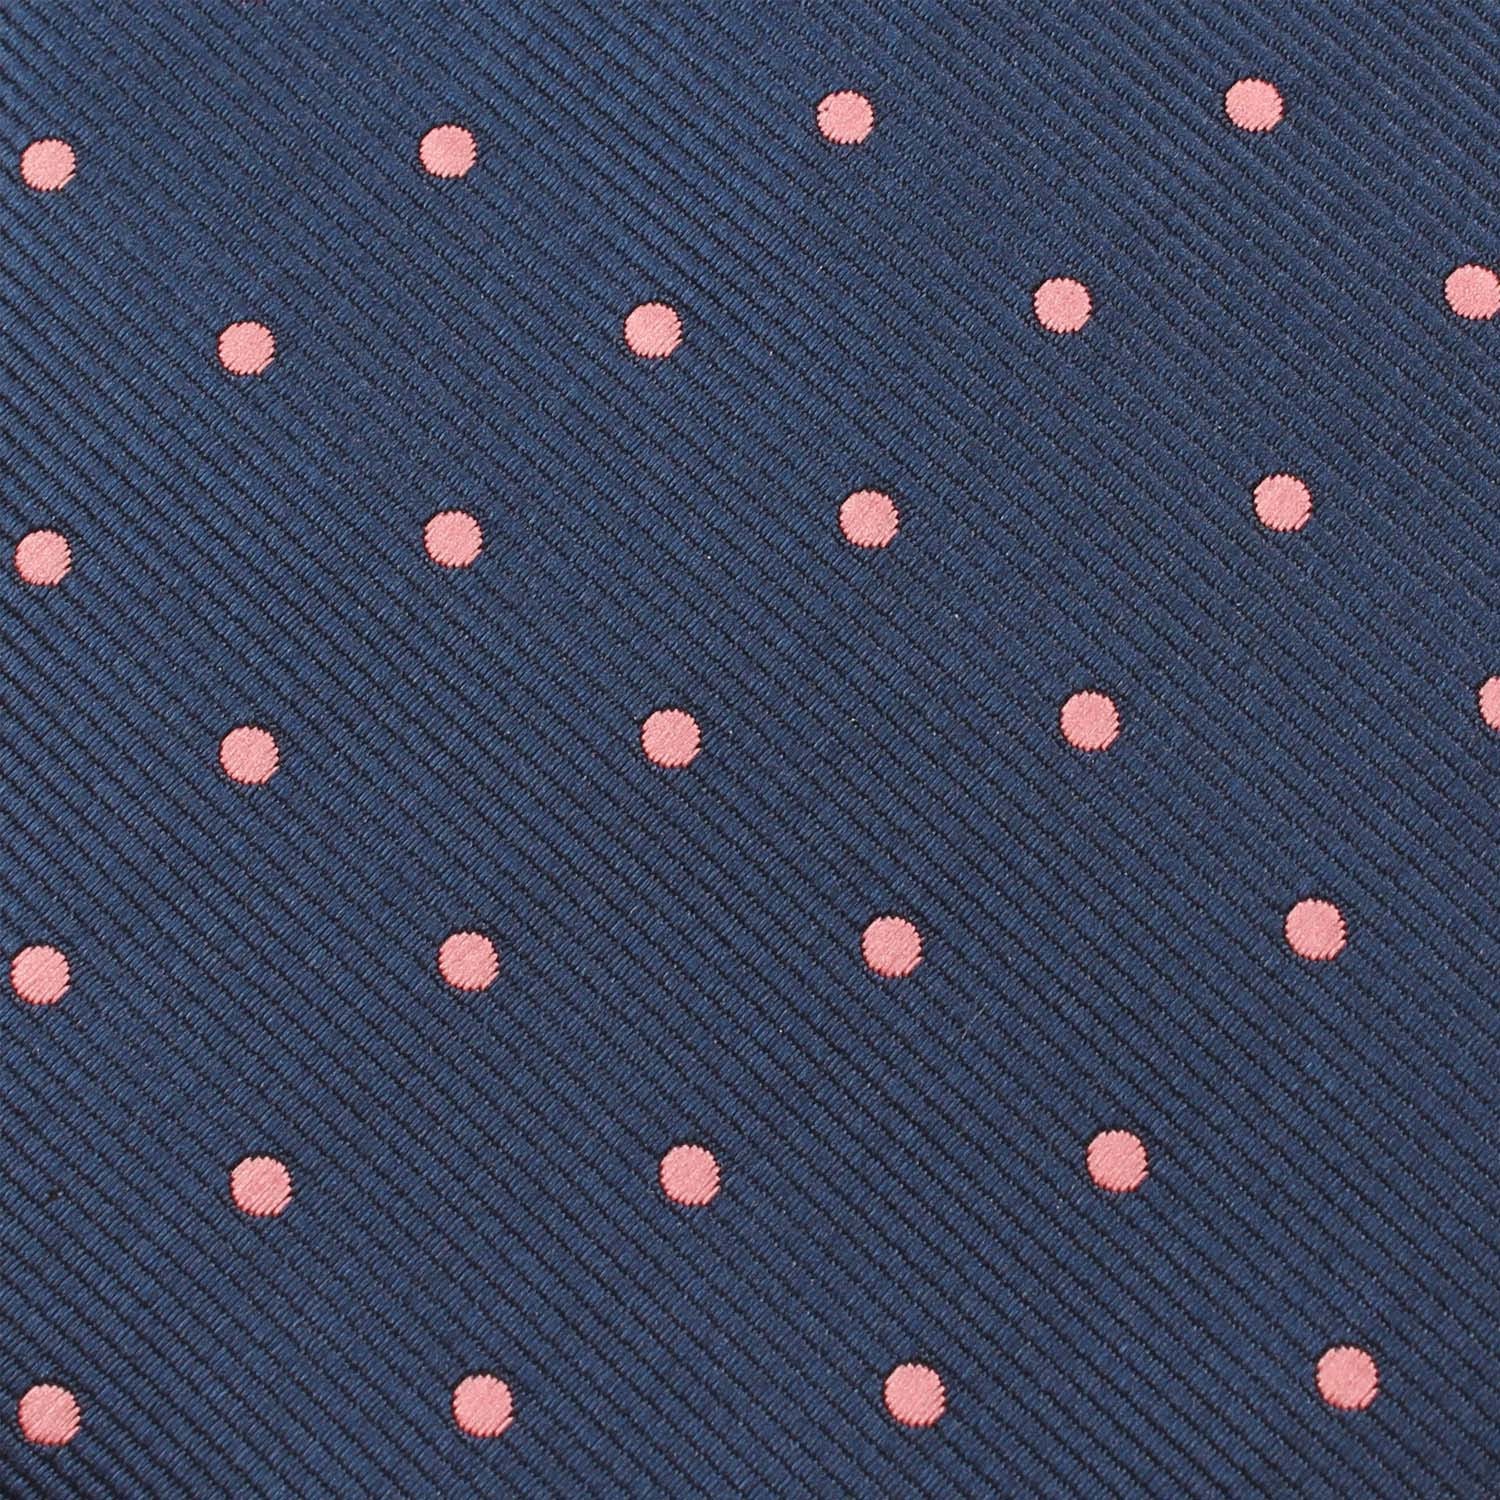 Navy Blue with Pink Polka Dots Fabric Skinny Tie X004